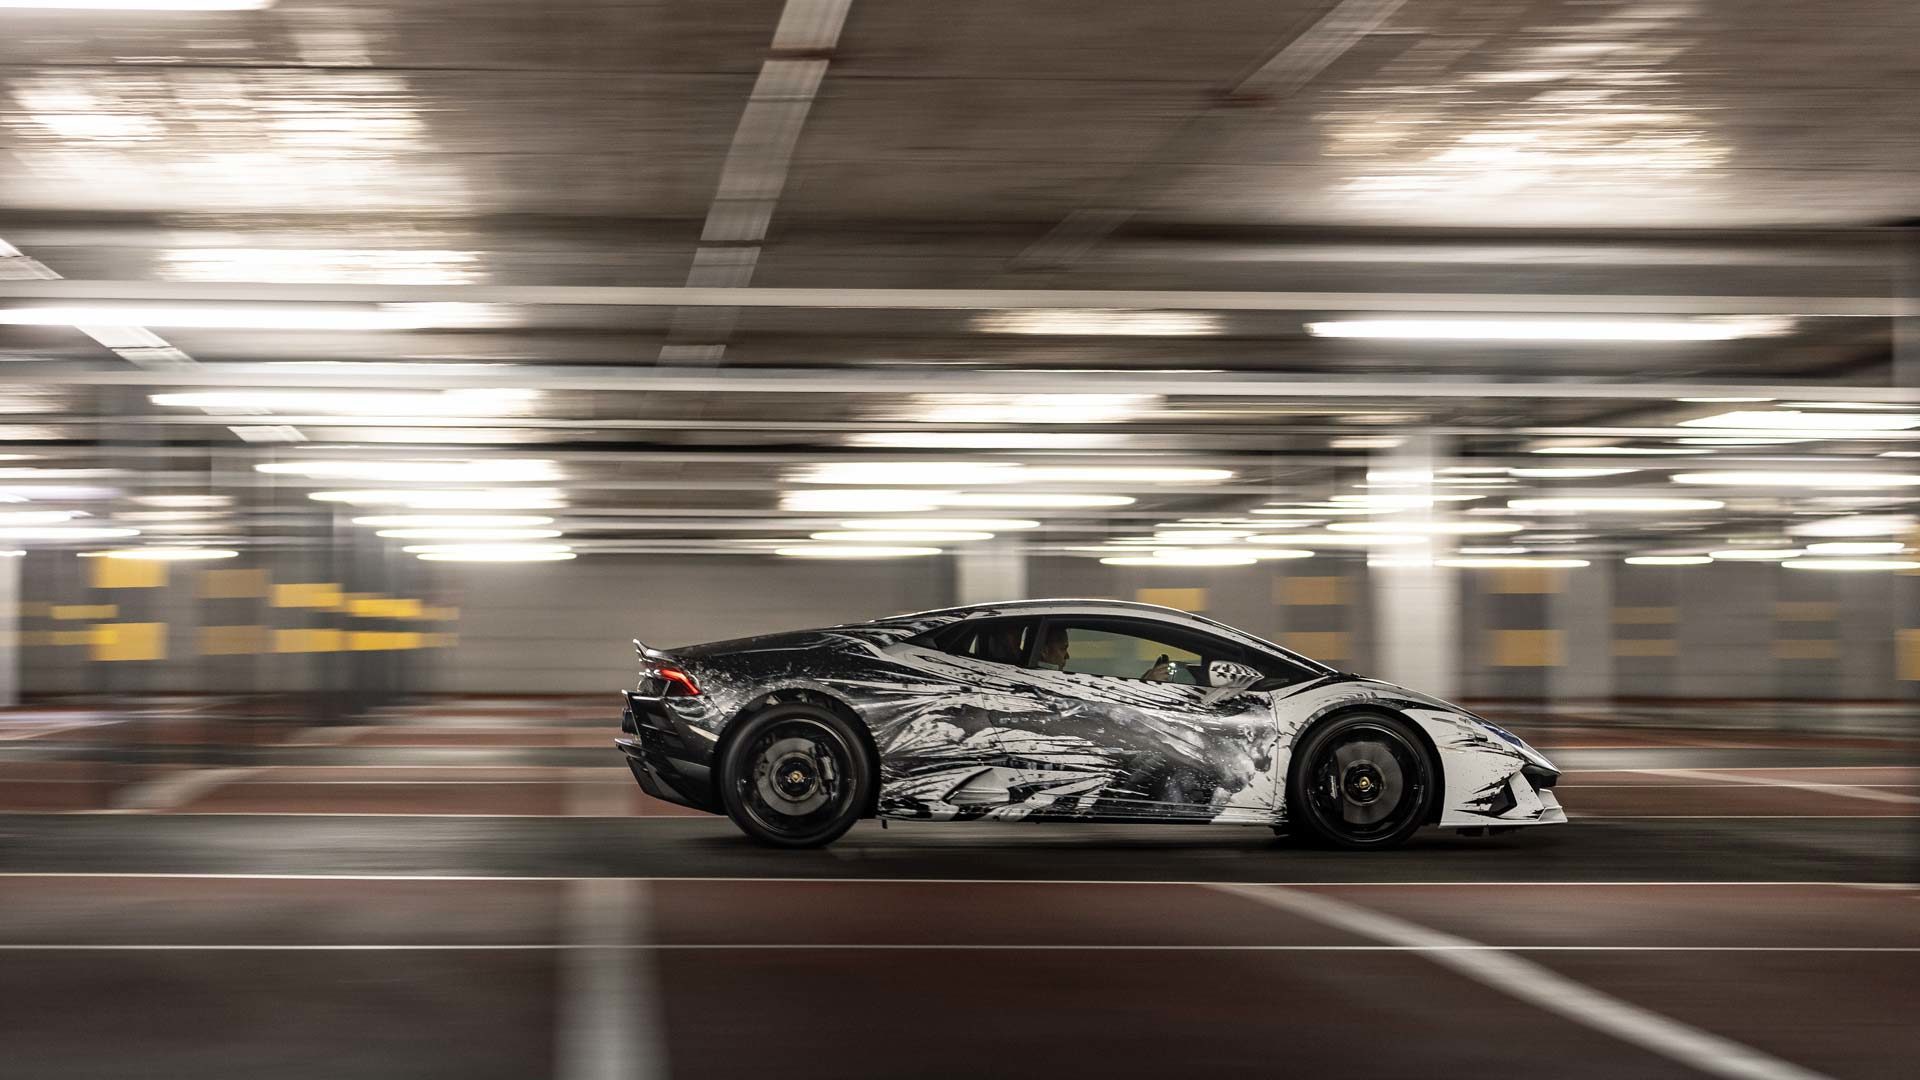 New Lamborghini Huracan art car is painted only by fingertips